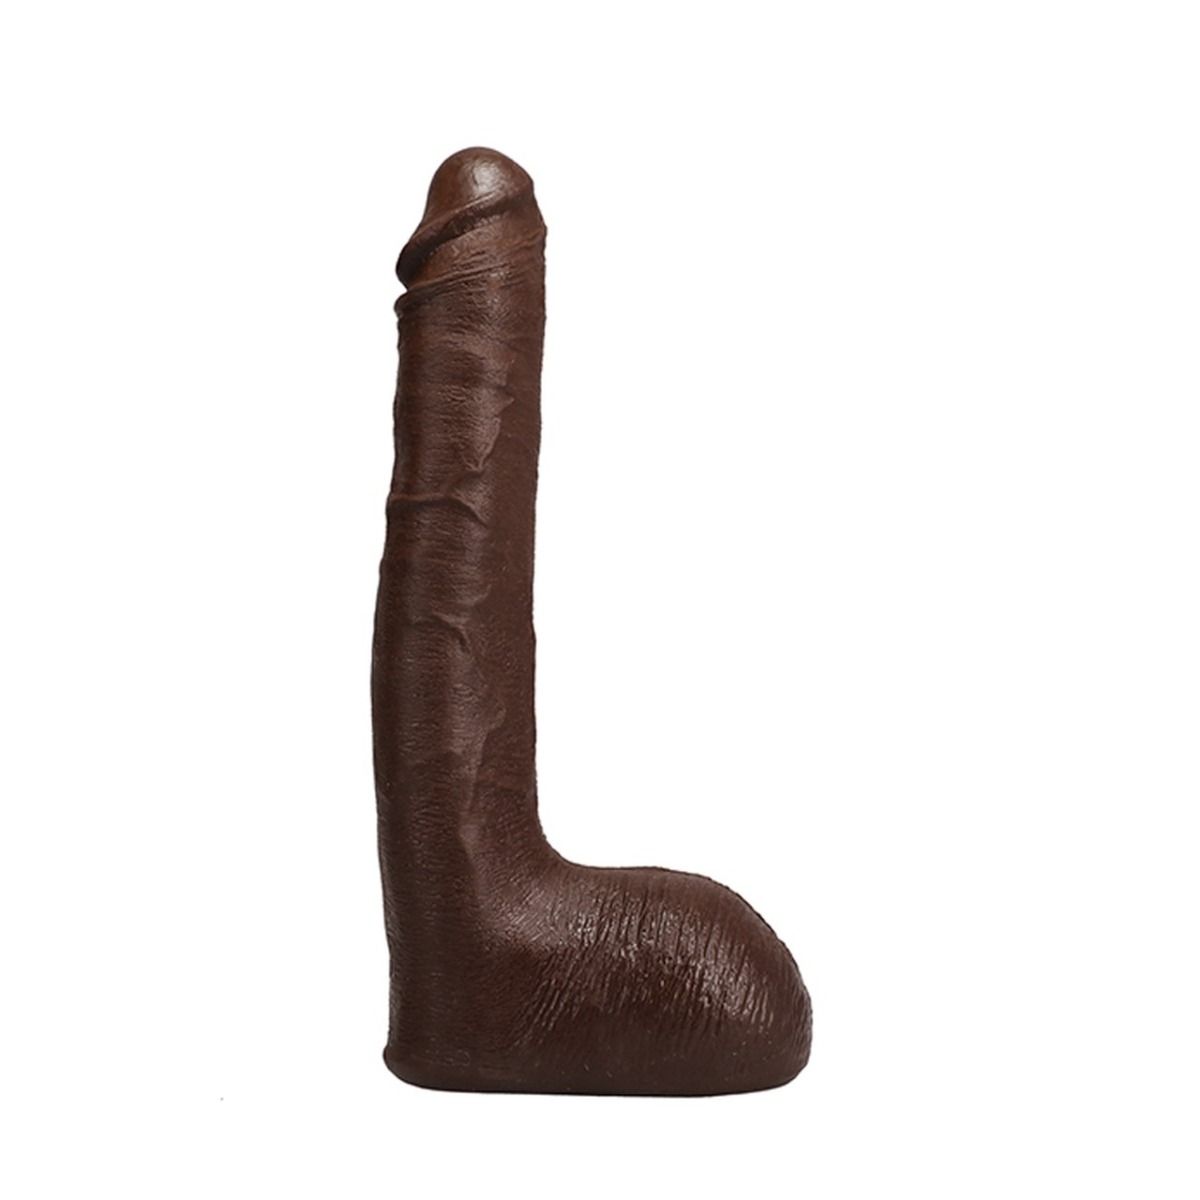 DOC JOHNSON Signature Cocks - Ricky Johnson 10" ULTRASKYN Cock with Removable Vac-U-Lock Suction Cup